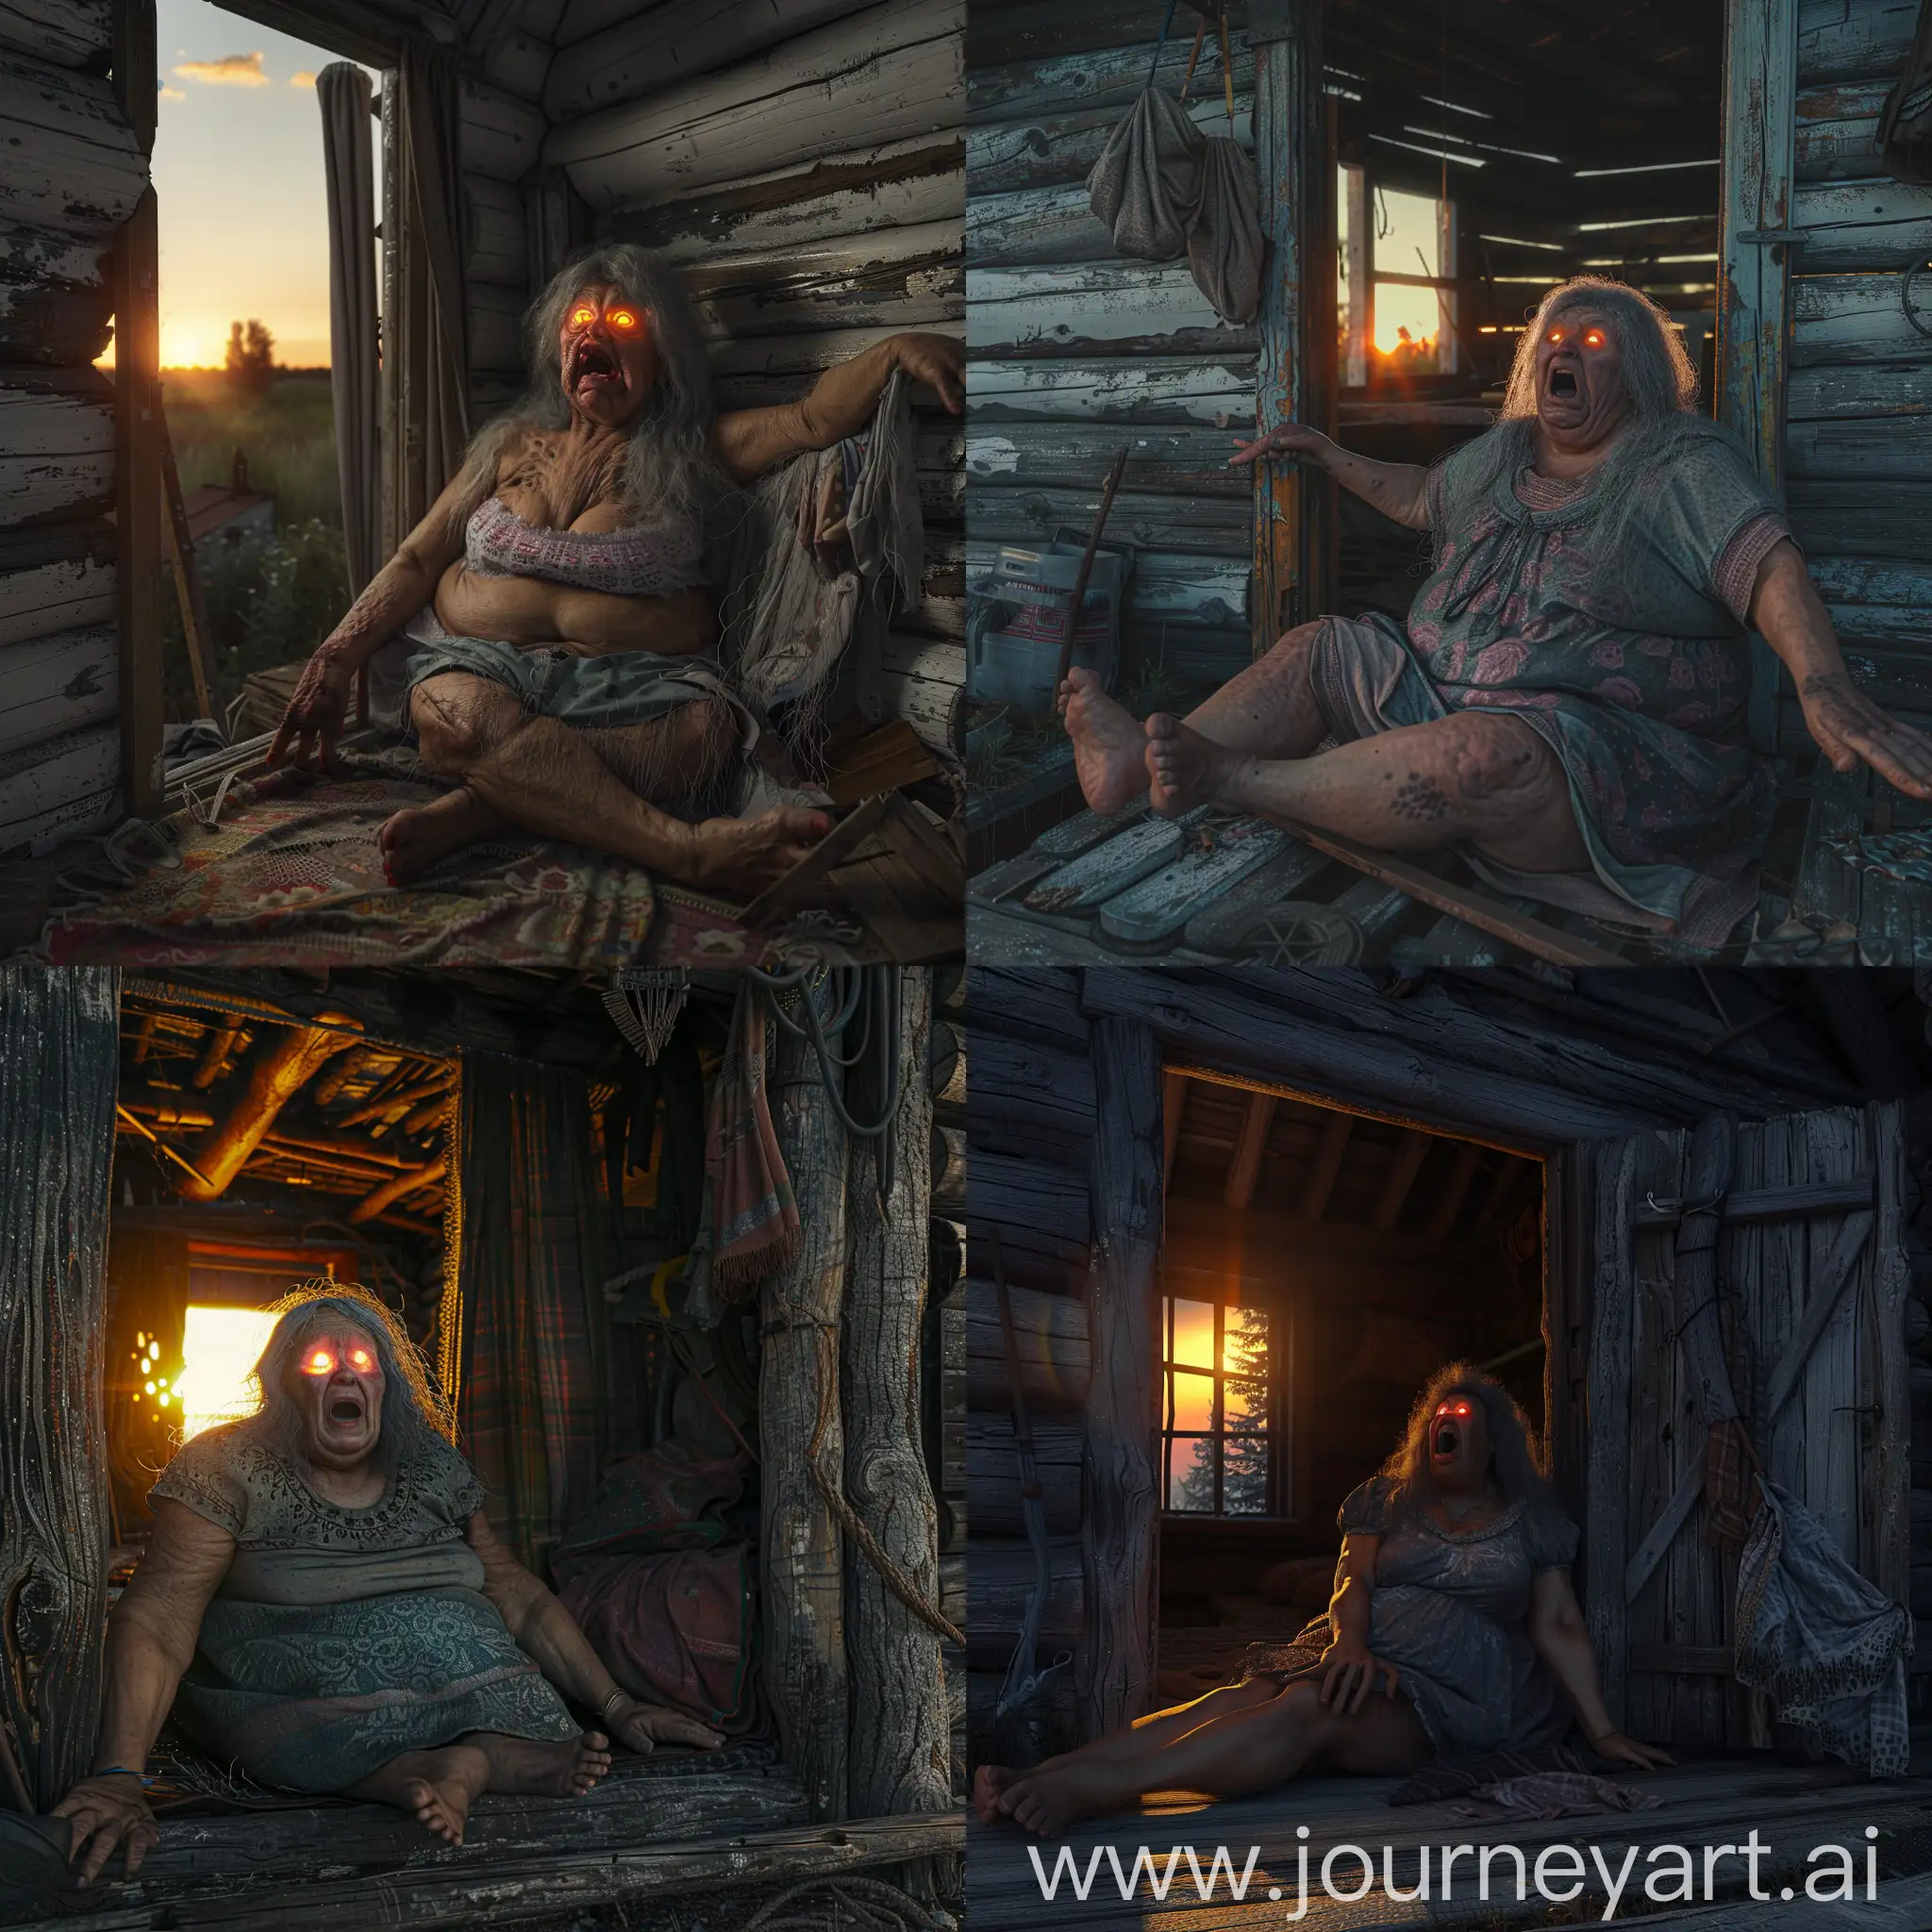 HyperRealistic-Russian-Hut-Interior-Enigmatic-Woman-in-Sunset-Glow